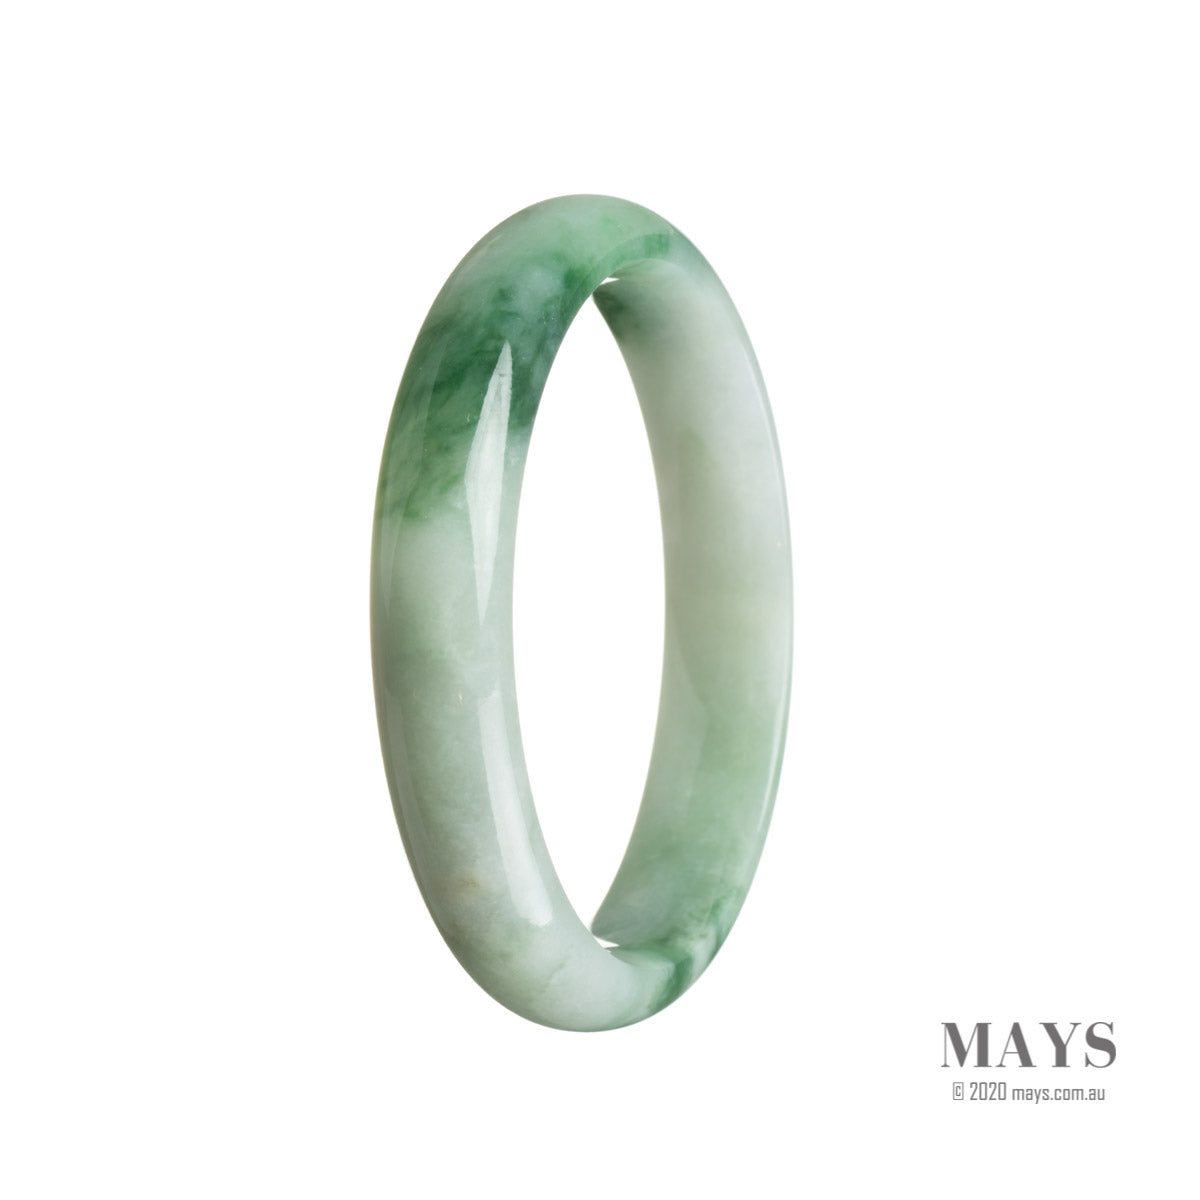 Image of a half-moon shaped green jade bangle with a smooth, glossy surface. The bangle is made of genuine grade A green flower jade and measures 56mm in diameter. It has a beautiful, natural color and pattern.